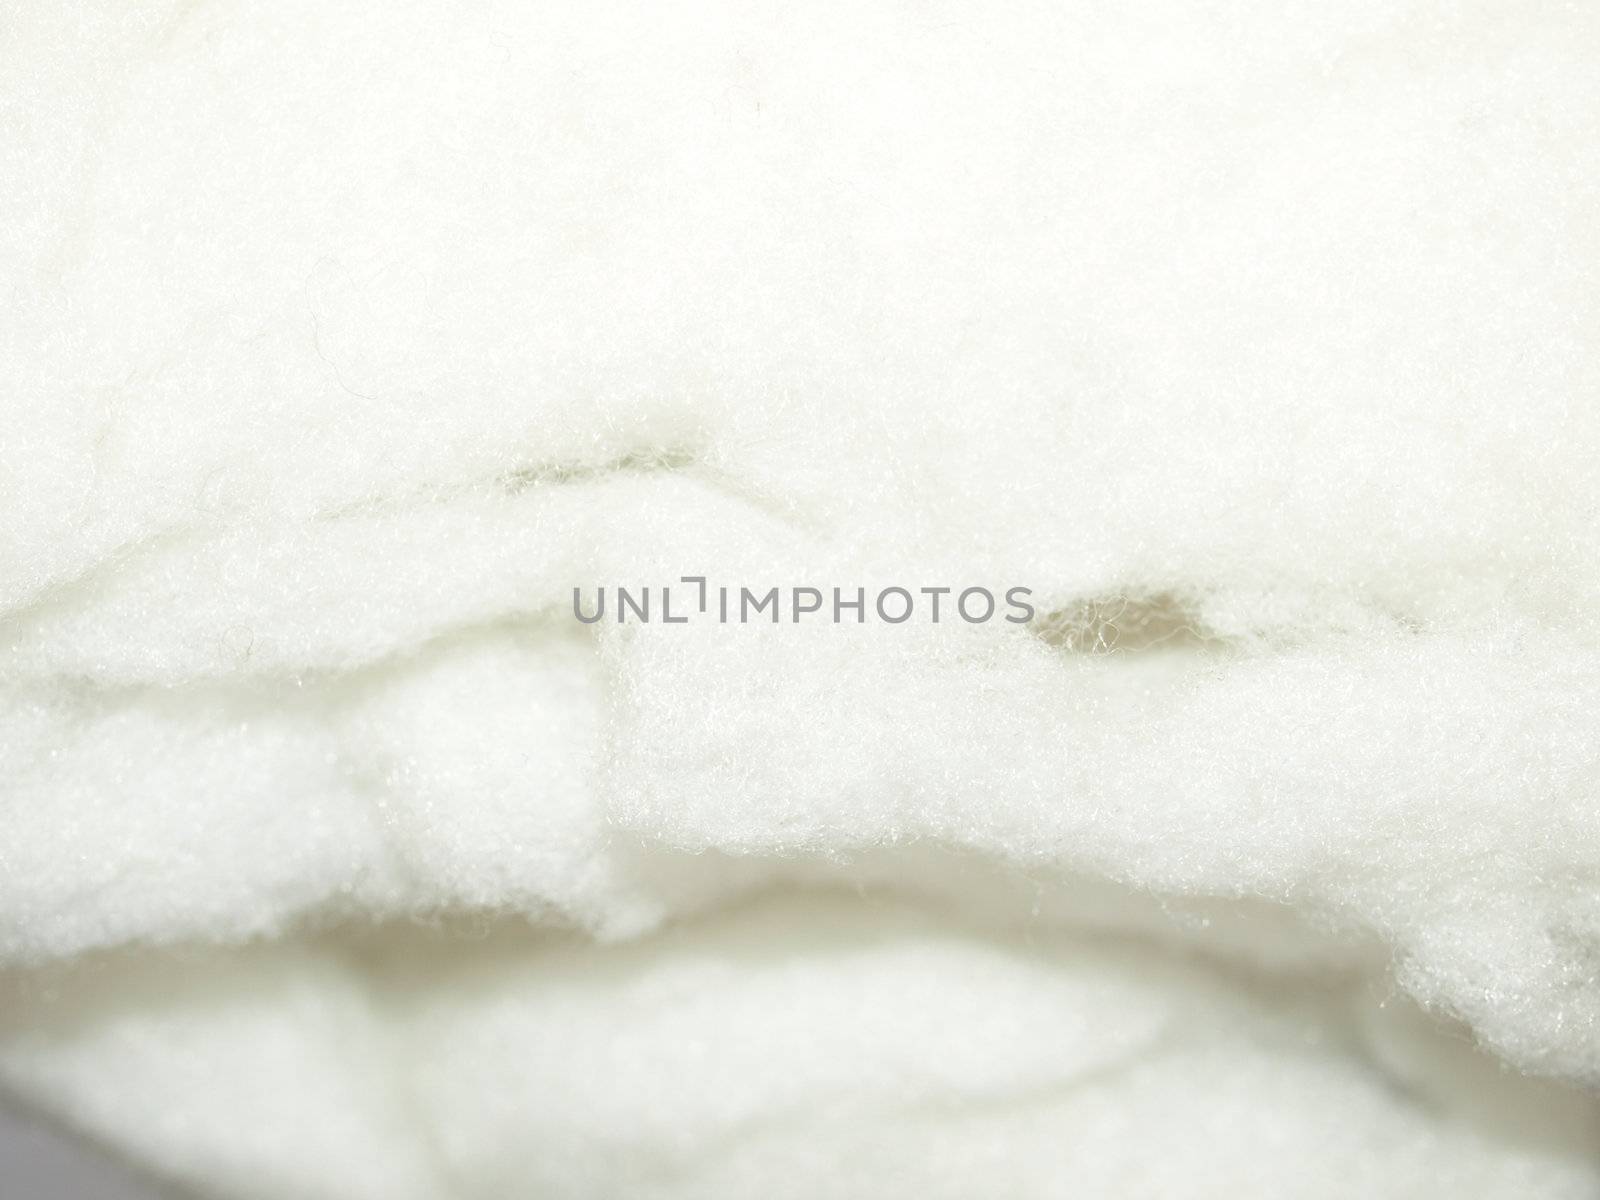 Wool by claudiodivizia